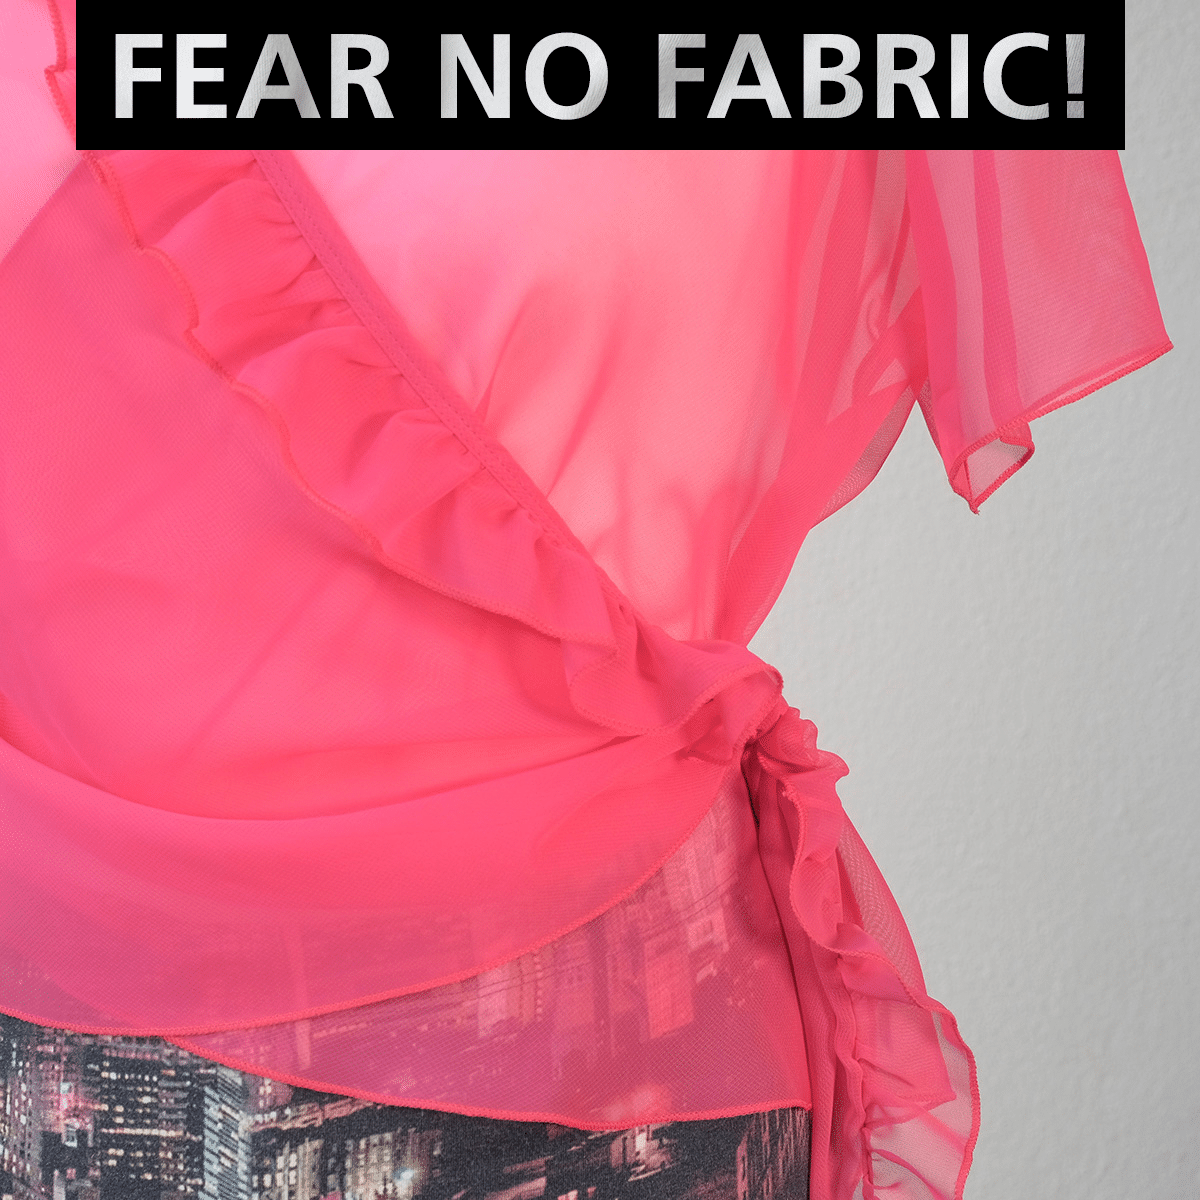 Give your stitching some FLAIR this summer!